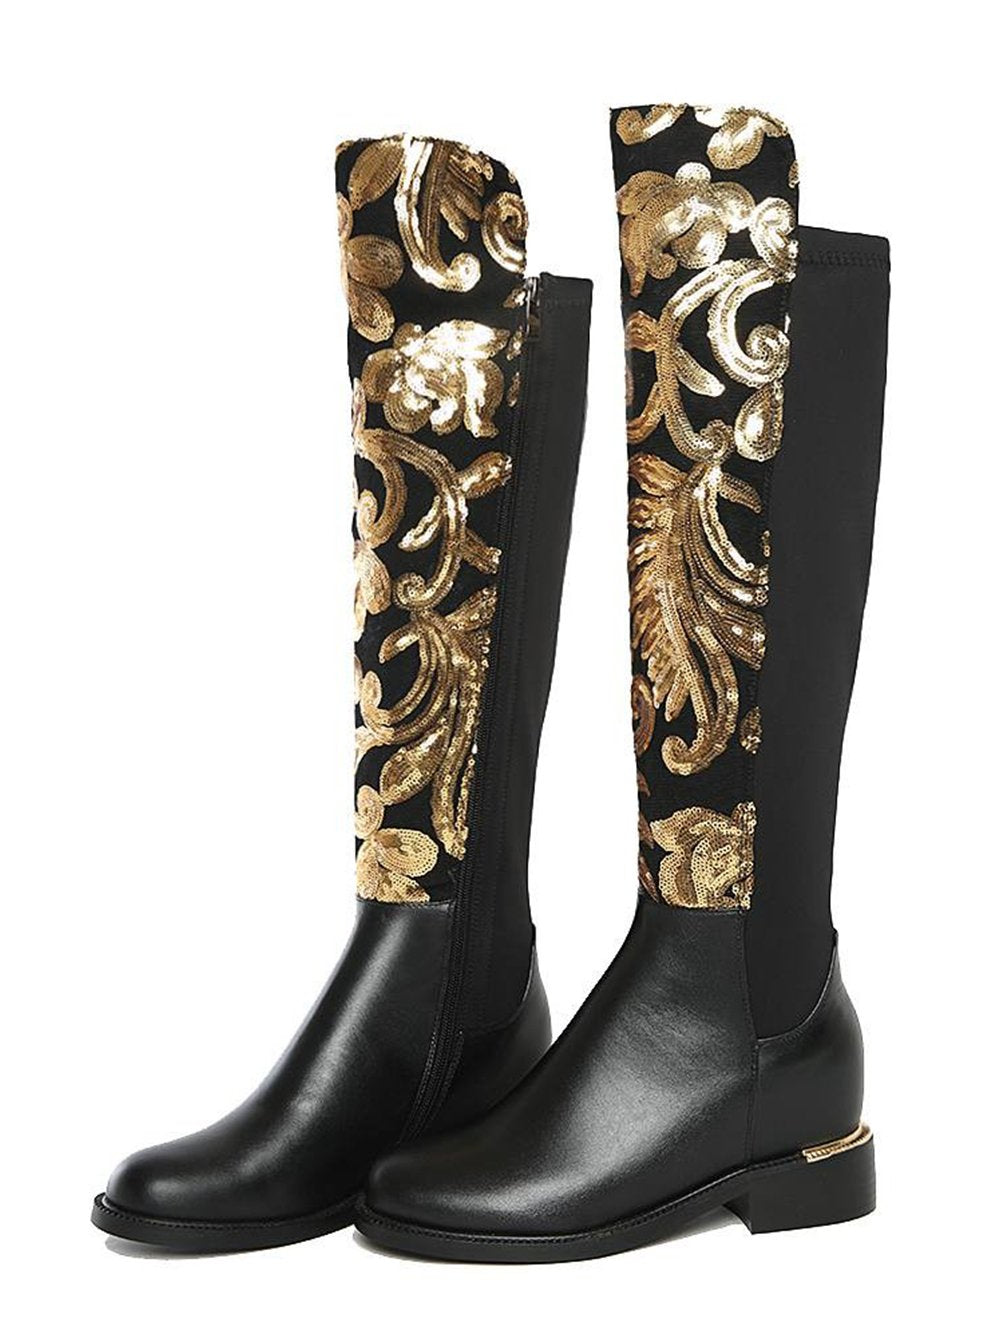 Glittery Fern Knee-High Faux-Leather Boots